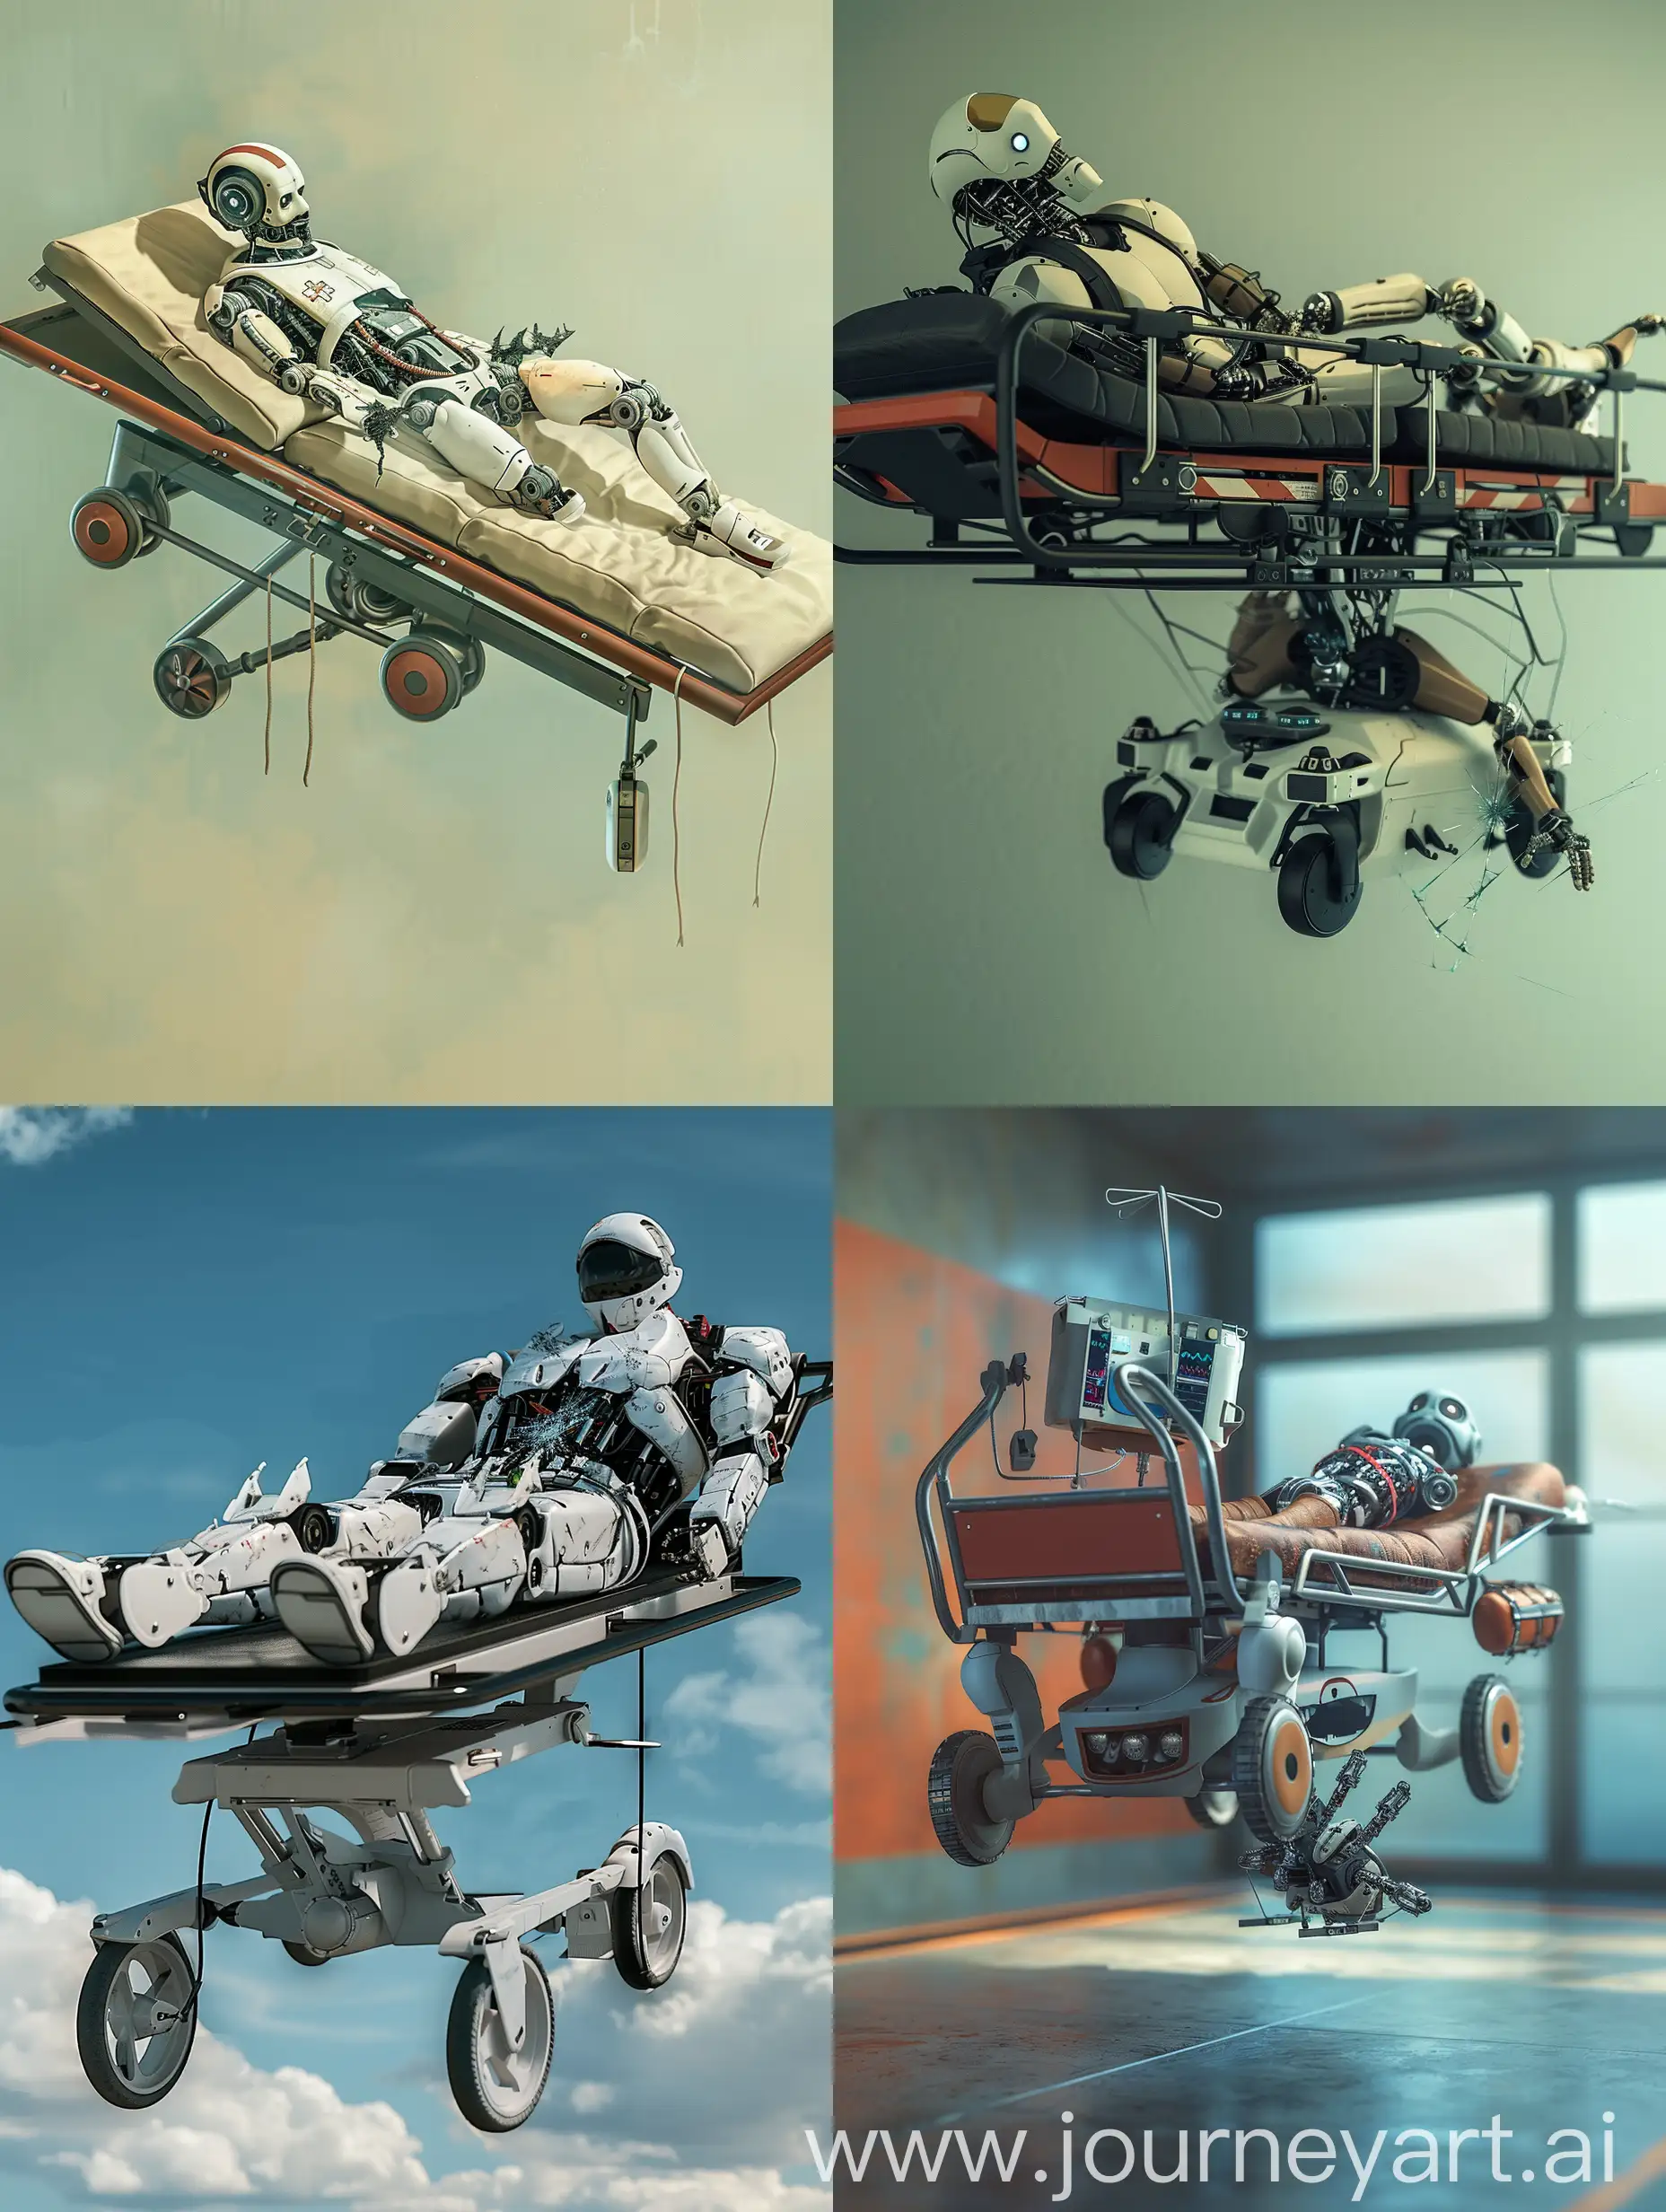 A flying medical gurney with a broken robot lying on it